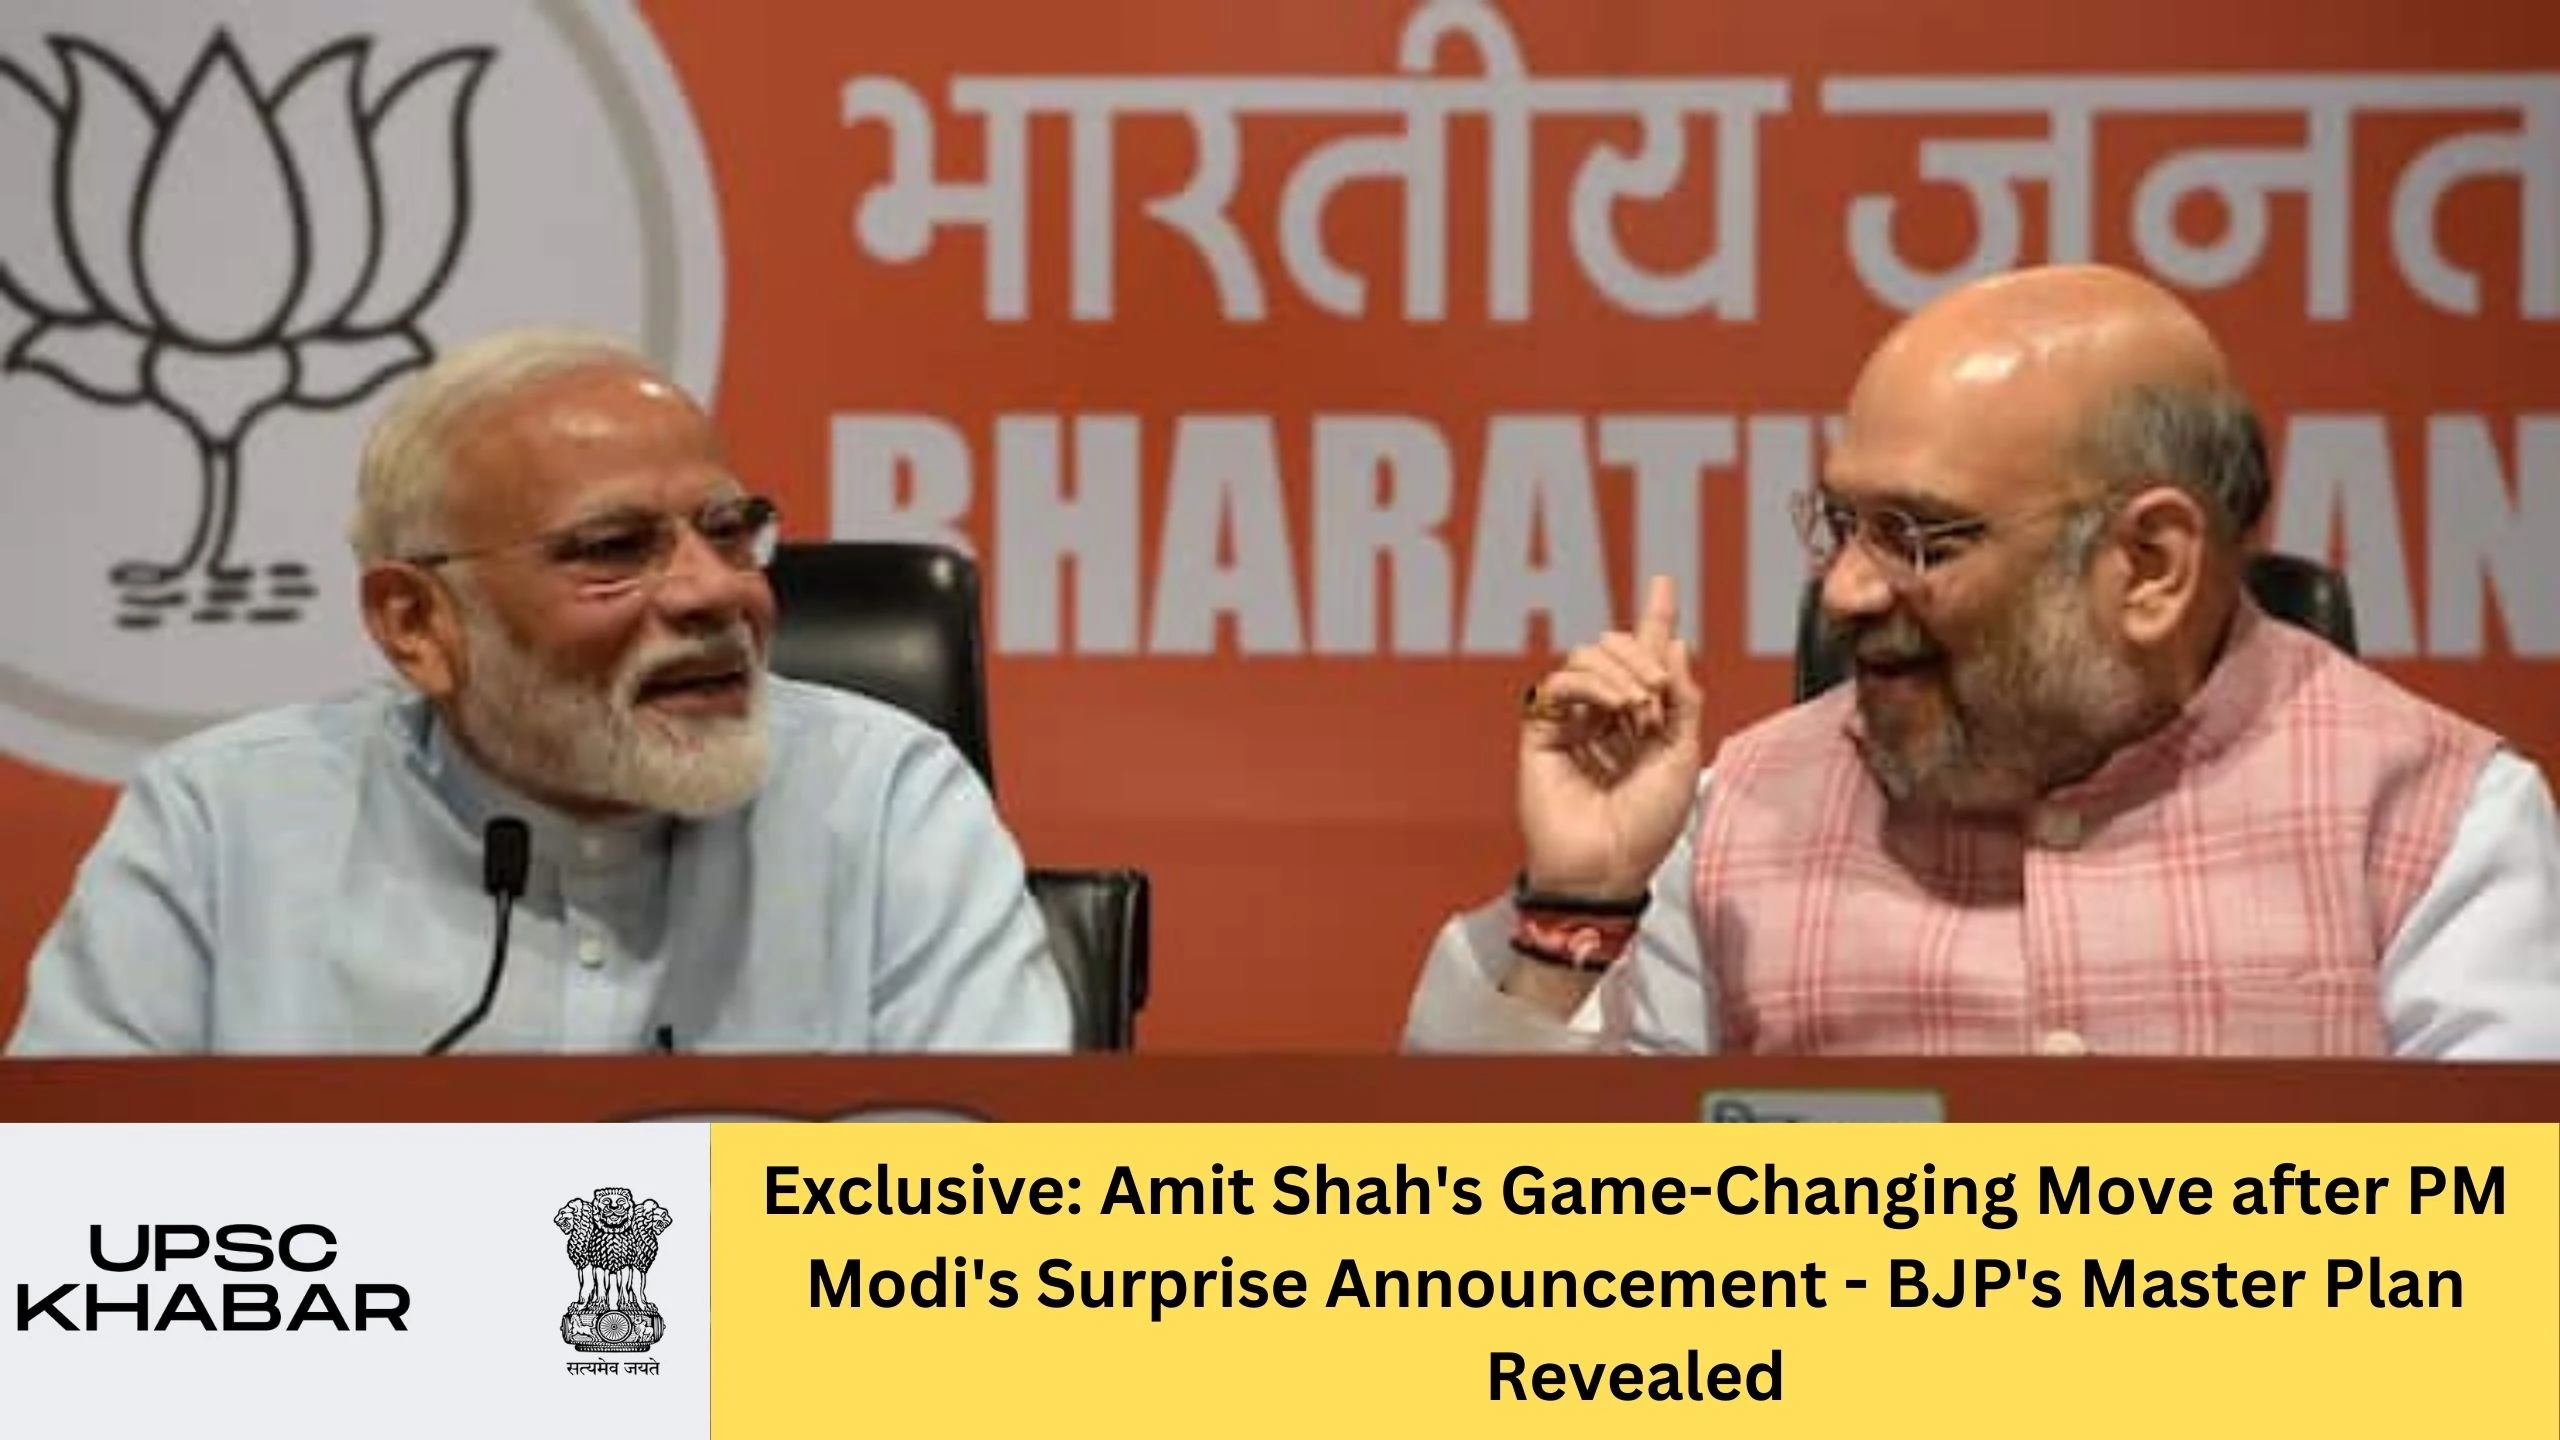 Exclusive: Amit Shah's Game-Changing Move after PM Modi's Surprise Announcement - BJP's Master Plan Revealed